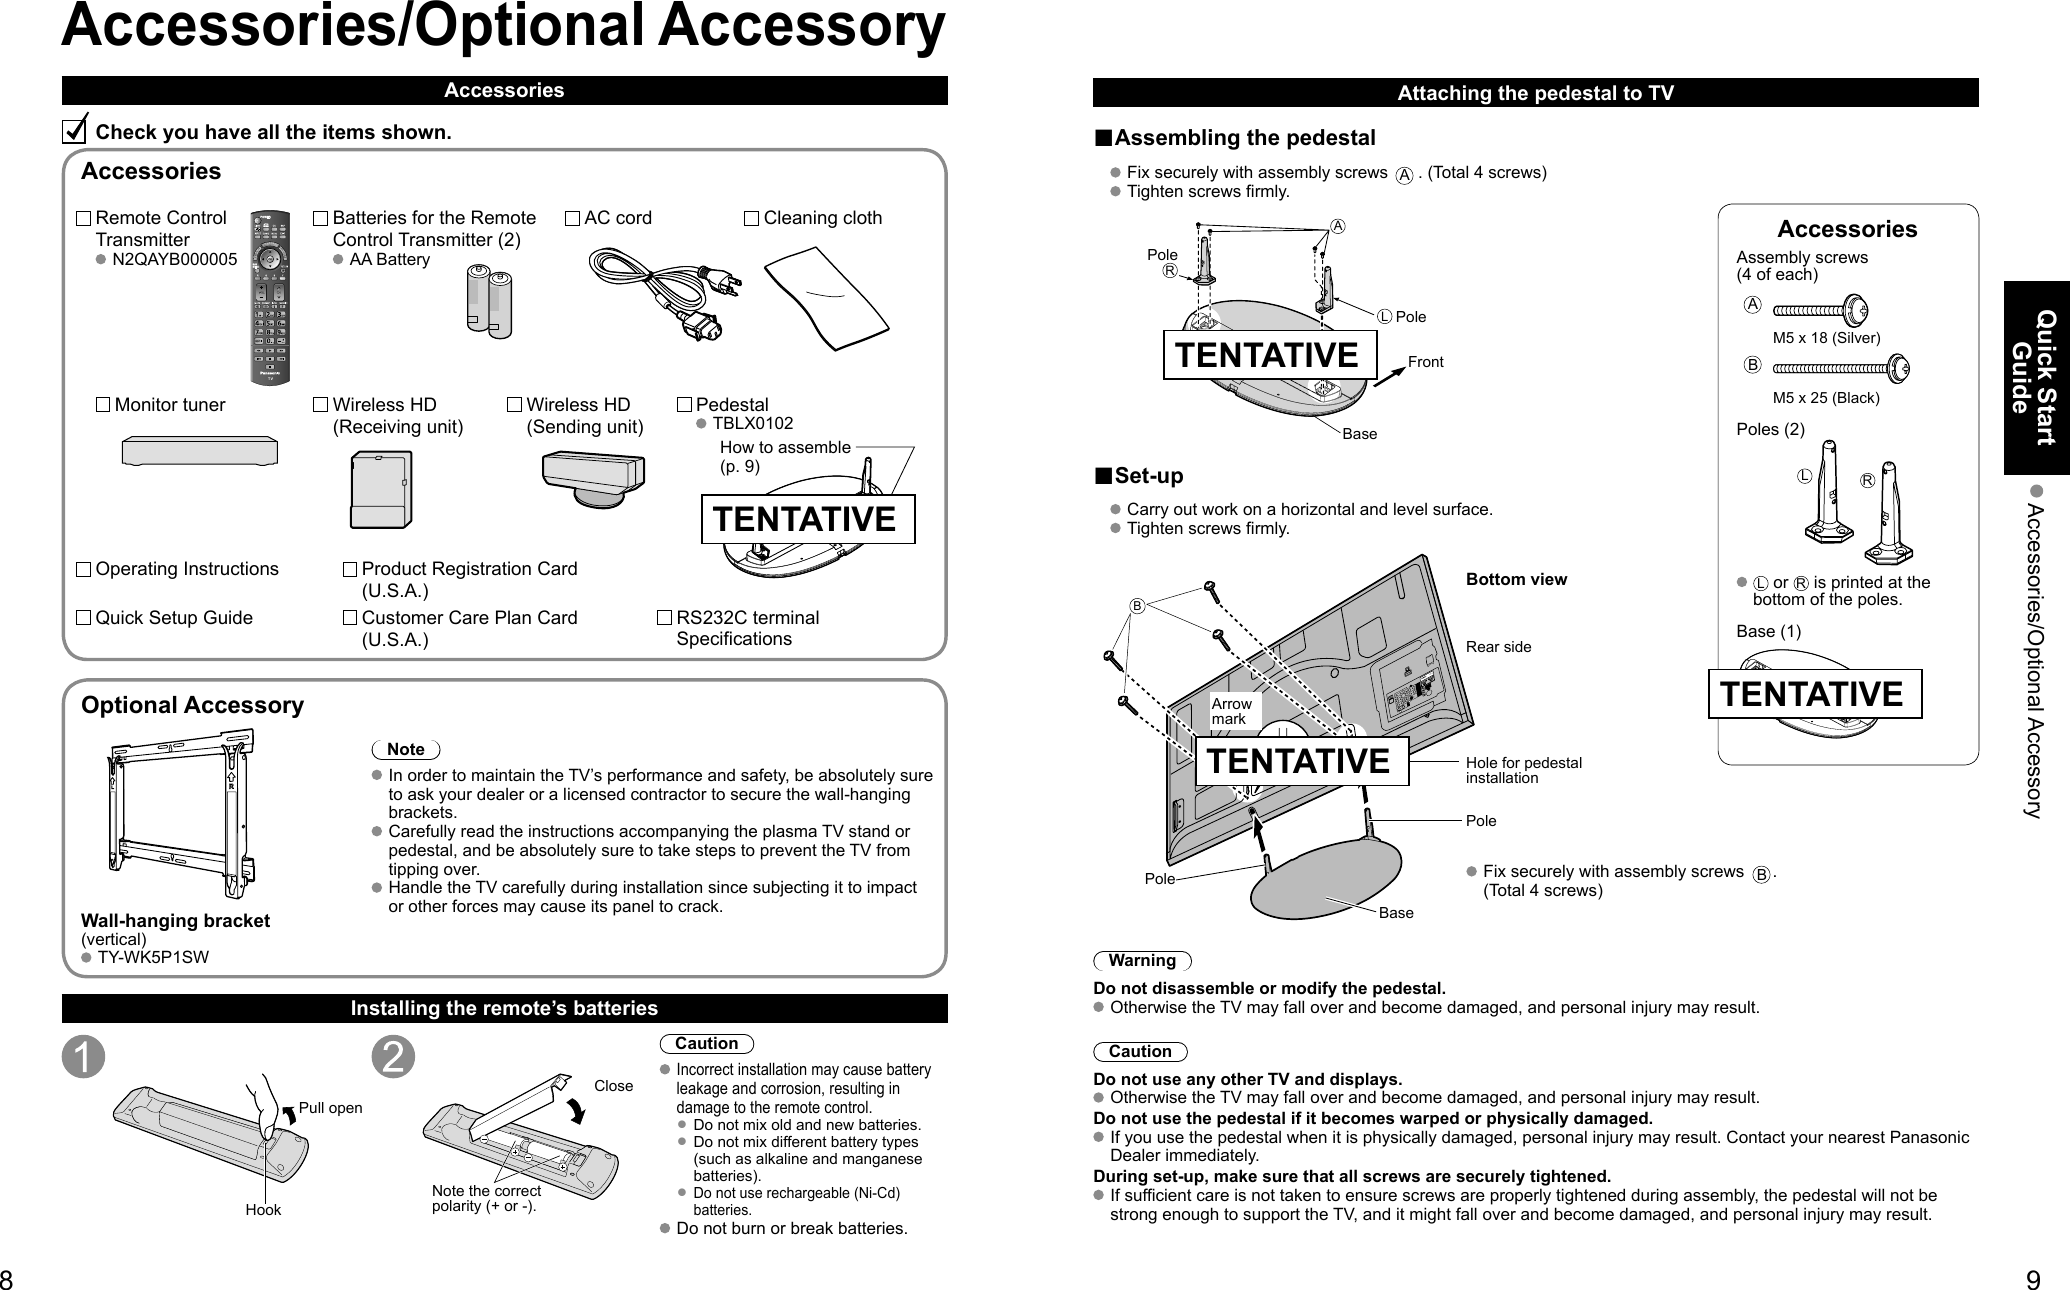 89Quick Start Guide Accessories/Optional AccessoryAccessoriesAssembly screws (4 of each) AM5 x 18 (Silver)BM5 x 25 (Black)Poles (2)LR  L or R is printed at the bottom of the poles. Base (1)VIERACASTVIERATOOLSVIERALinkAccessories/Optional AccessoryAccessoriesCheck you have all the items shown.Remote Control Transmitter N2QAYB000005Batteries for the Remote Control Transmitter (2) AA BatteryAC cordPedestal TBLX0102Product Registration Card (U.S.A.)Customer Care Plan Card (U.S.A.)Operating InstructionsQuick Setup Guide Installing the remote’s batteriesPull openHookNote the correct polarity (+ or -).CloseCaution Incorrect installation may cause battery leakage and corrosion, resulting in damage to the remote control. •  Do not mix old and new batteries. •  Do not mix different battery types (such as alkaline and manganese batteries). •  Do not use rechargeable (Ni-Cd) batteries. Do not burn or break batteries.Optional AccessoryNote In order to maintain the TV’s performance and safety, be absolutely sure to ask your dealer or a licensed contractor to secure the wall-hanging brackets. Carefully read the instructions accompanying the plasma TV stand or pedestal, and be absolutely sure to take steps to prevent the TV from tipping over. Handle the TV carefully during installation since subjecting it to impact or other forces may cause its panel to crack.Wall-hanging bracket(vertical) TY-WK5P1SWAttaching the pedestal to TV■Assembling the pedestal   Fix securely with assembly screws A. (Total 4 screws)   Tighten screws firmly. ALRPoleFrontPoleBase■Set-up   Carry out work on a horizontal and level surface.   Tighten screws firmly.B Fix securely with assembly screws B. (Total 4 screws)Rear sideArrow markPoleHole for pedestal installation Pole Base Bottom viewWarningDo not disassemble or modify the pedestal. Otherwise the TV may fall over and become damaged, and personal injury may result.CautionDo not use any other TV and displays. Otherwise the TV may fall over and become damaged, and personal injury may result.Do not use the pedestal if it becomes warped or physically damaged. If you use the pedestal when it is physically damaged, personal injury may result. Contact your nearest Panasonic Dealer immediately.During set-up, make sure that all screws are securely tightened. If sufficient care is not taken to ensure screws are properly tightened during assembly, the pedestal will not be strong enough to support the TV, and it might fall over and become damaged, and personal injury may result.AccessoriesHow to assemble (p. 9)Cleaning clothRS232C terminal SpecificationsTENTATIVETENTATIVEMonitor tuner Wireless HD (Receiving unit)Wireless HD (Sending unit)TENTATIVETENTATIVE